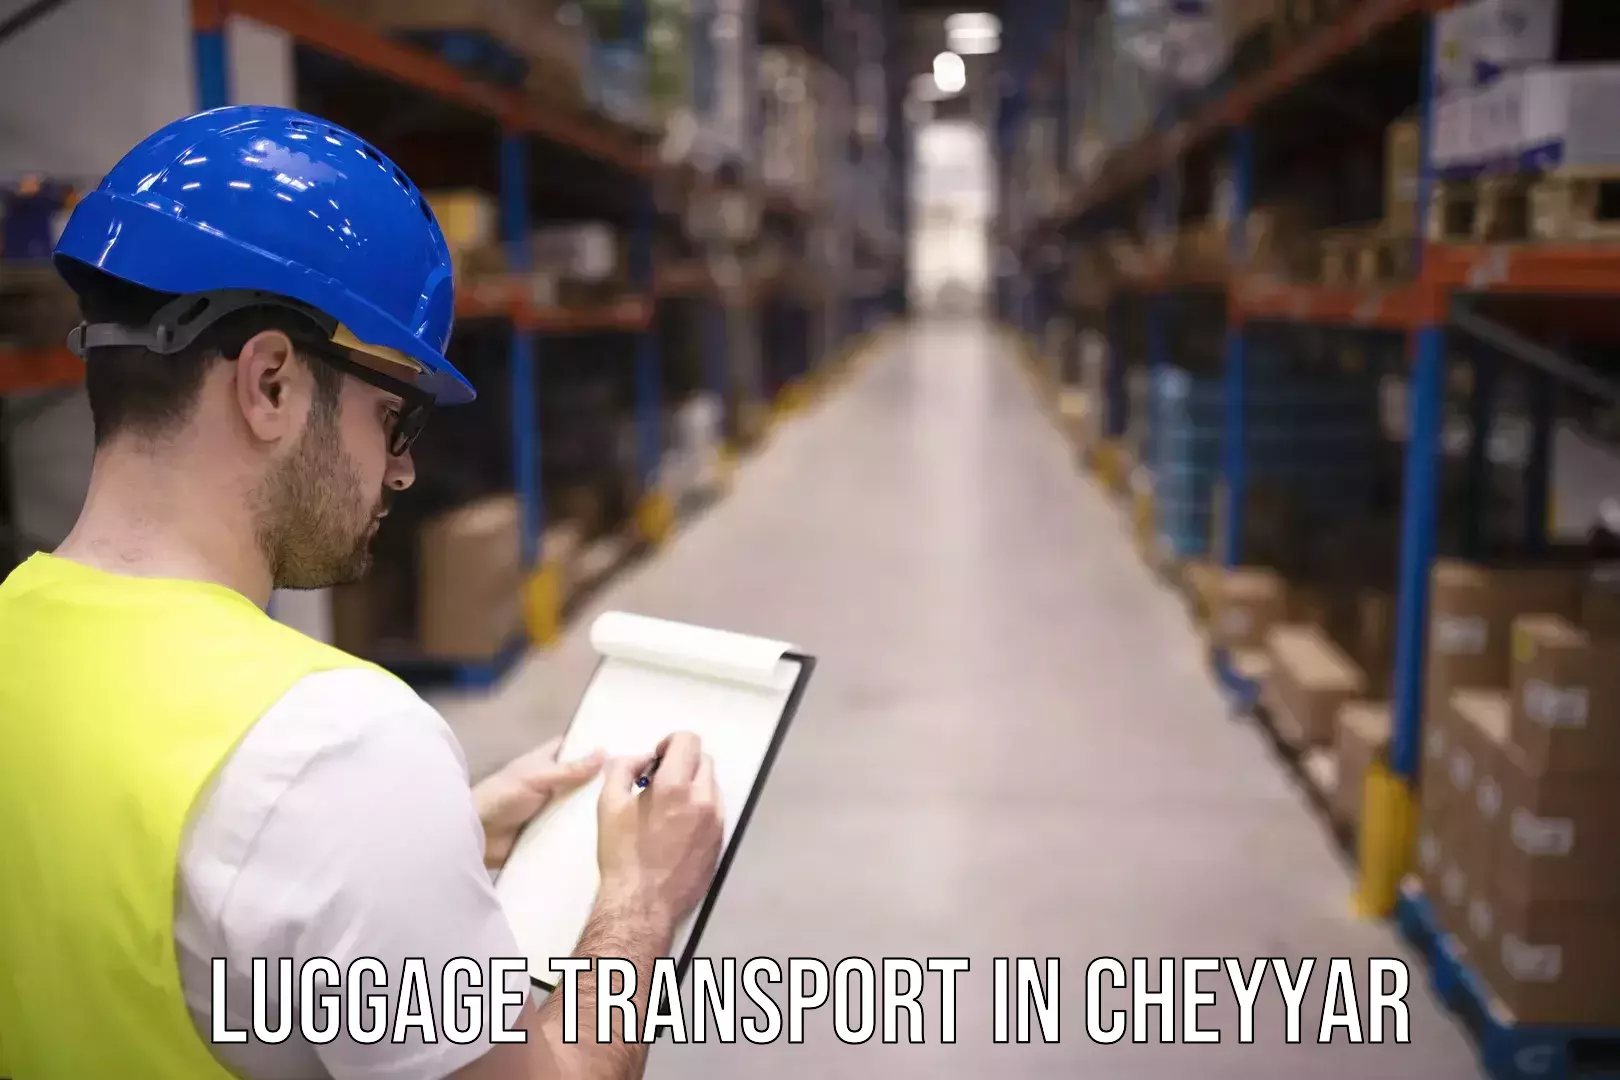 Luggage transport solutions in Cheyyar